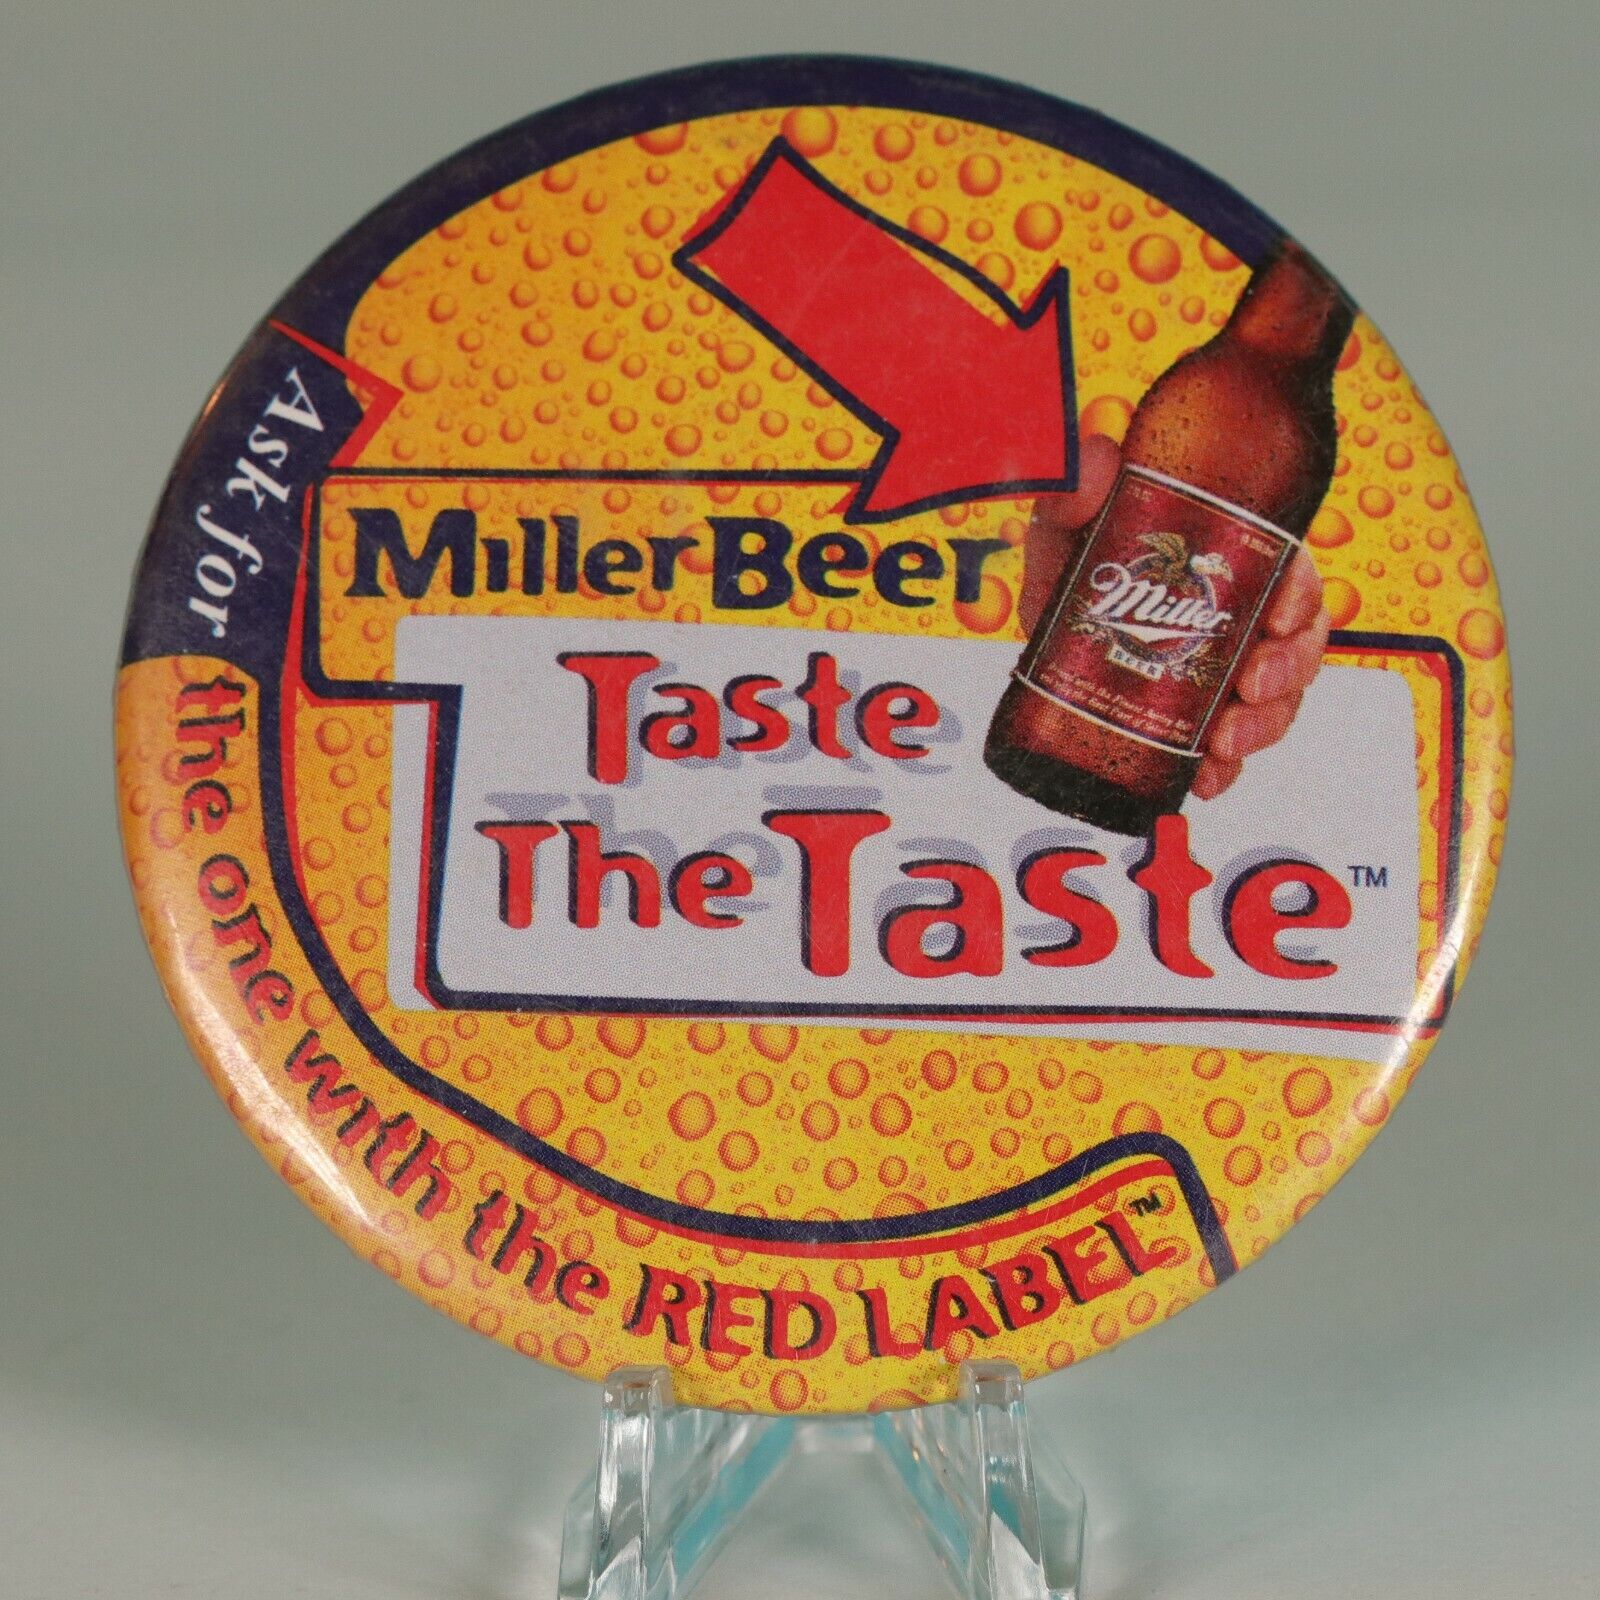 Pinback Button Miller Beer Taste The Taste The one with the Red Label 3 Inch